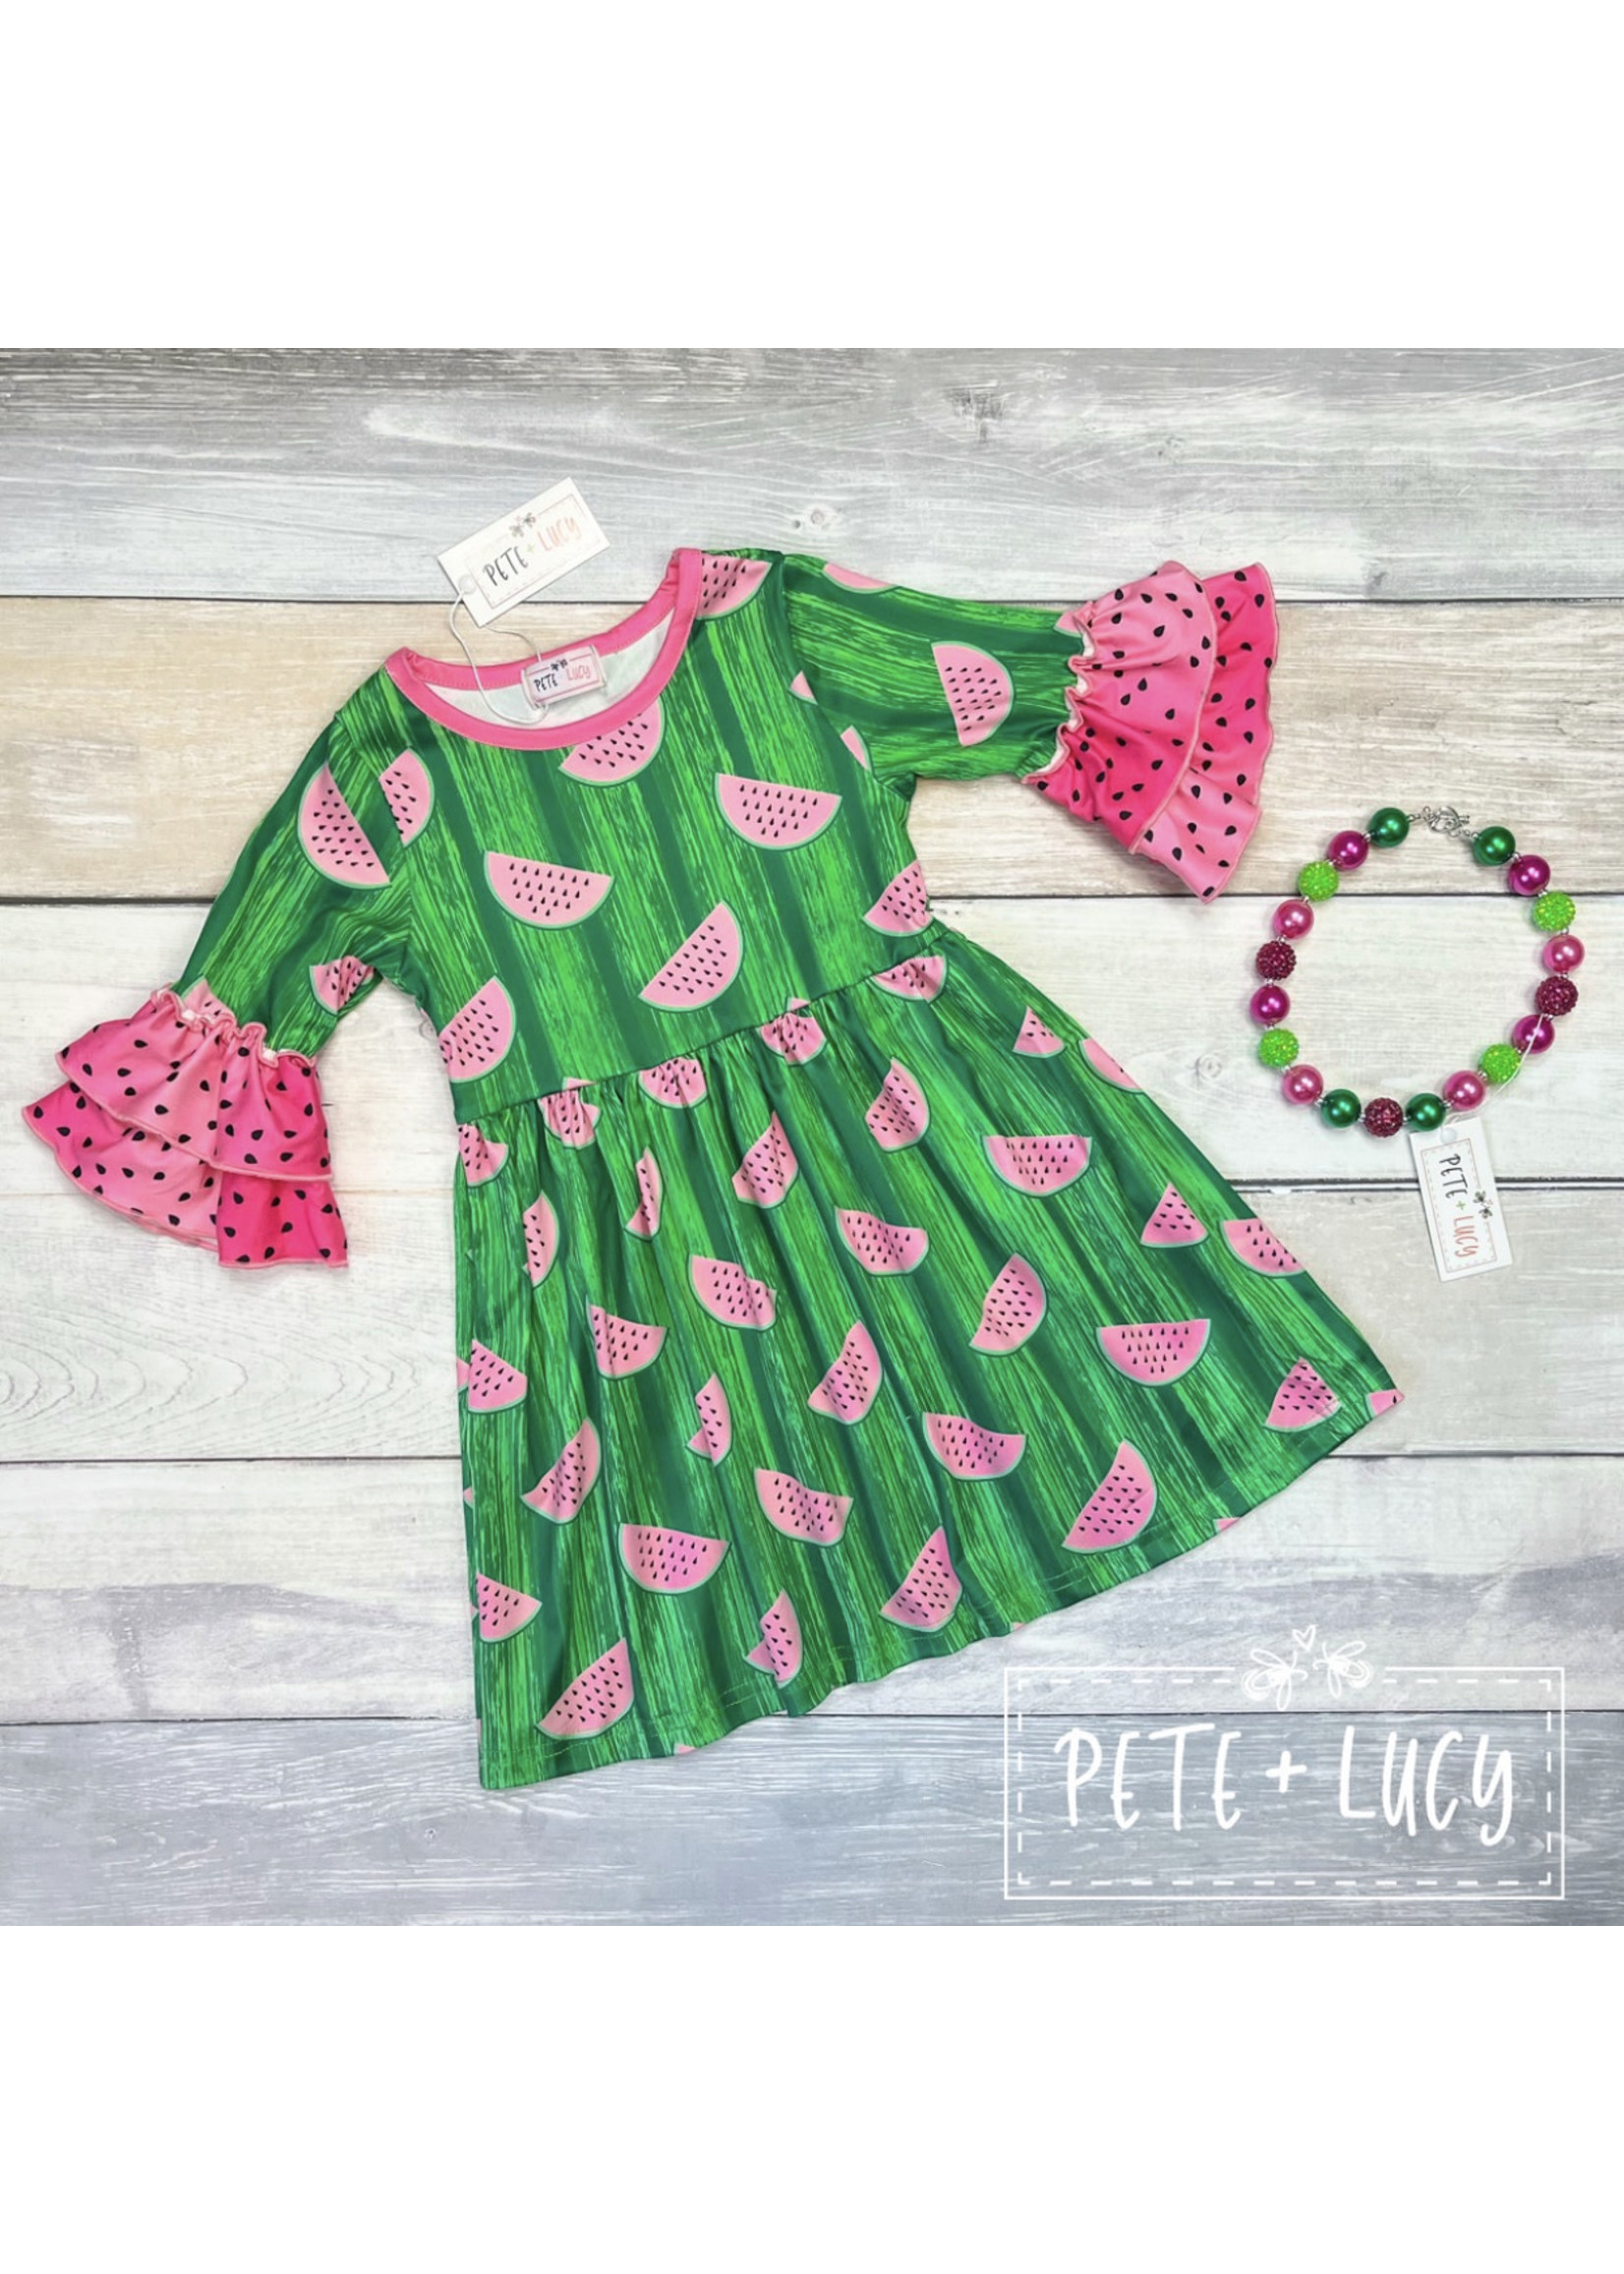 Pete & Lucy P + L Toddler Dress